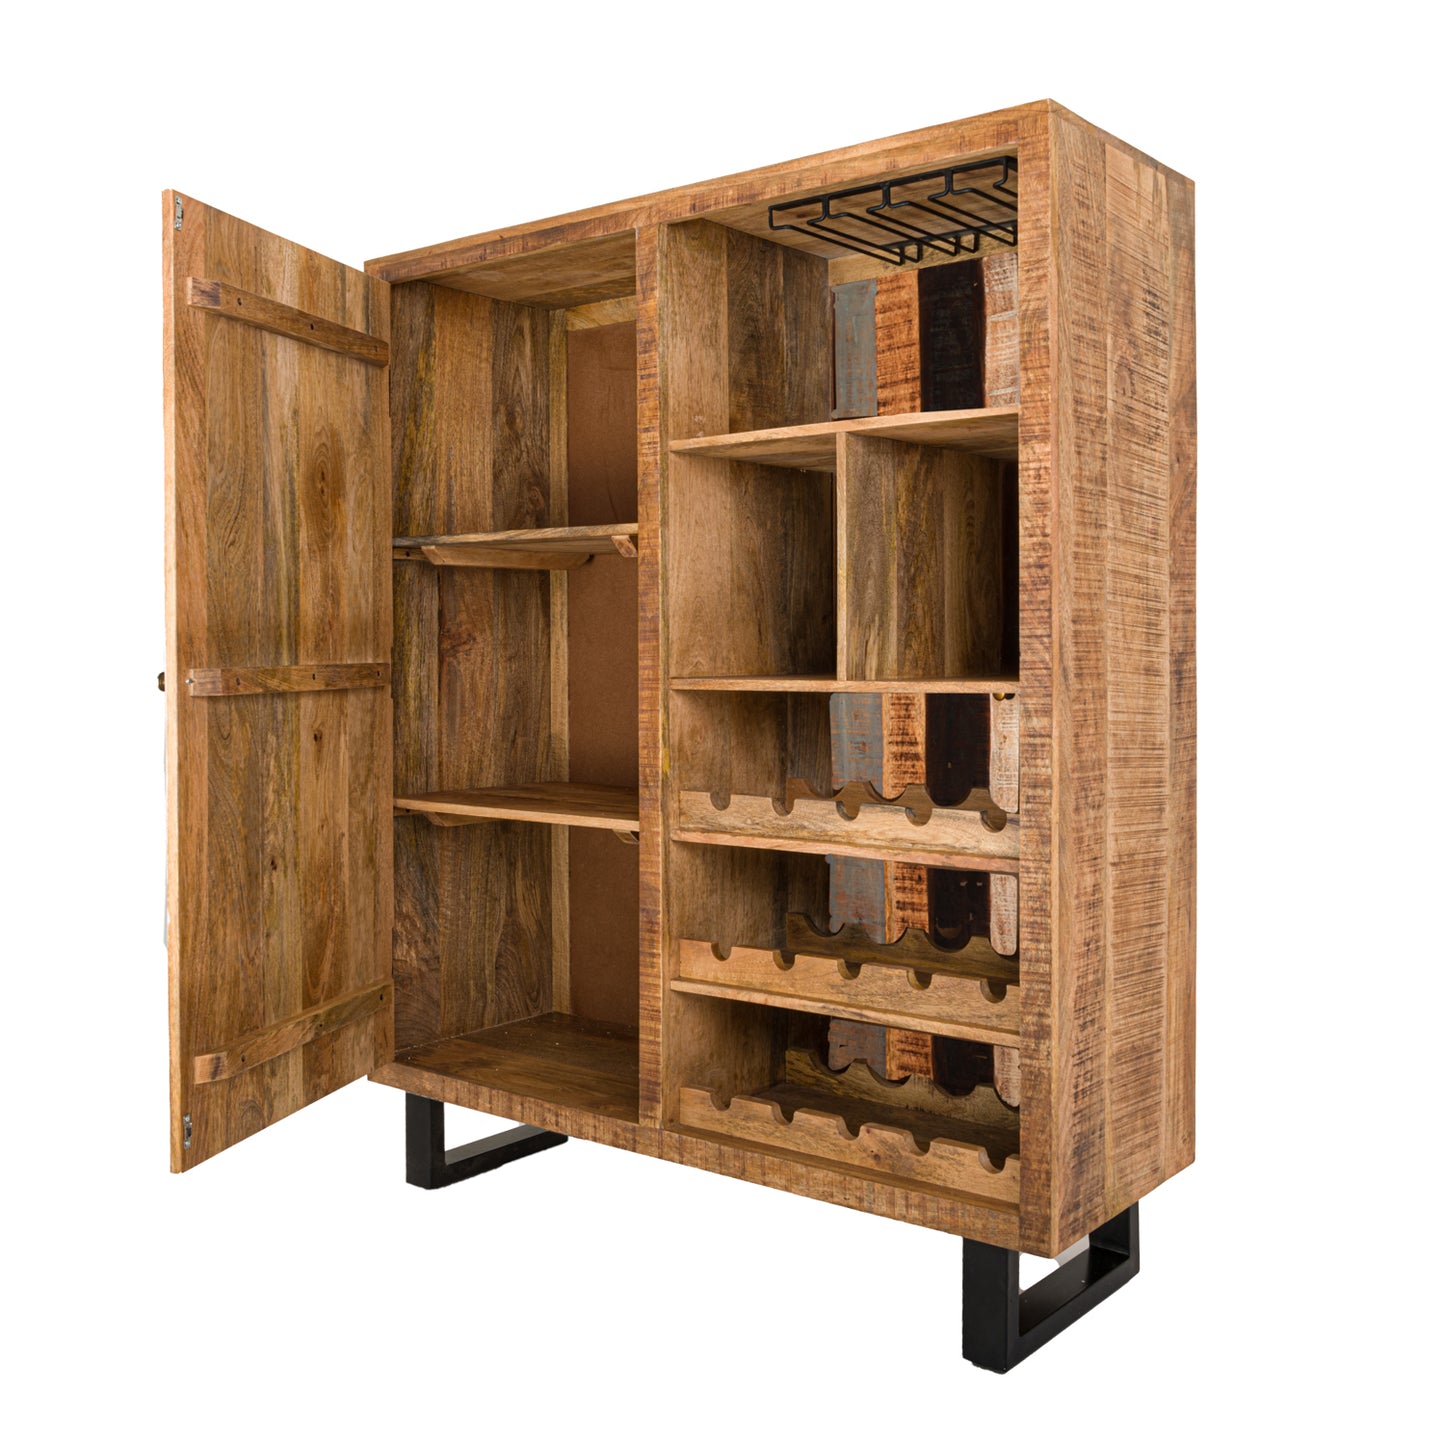 Industrial Style Drinks Cabinet - Reclaimed Wood Effect - mancavesuperstore